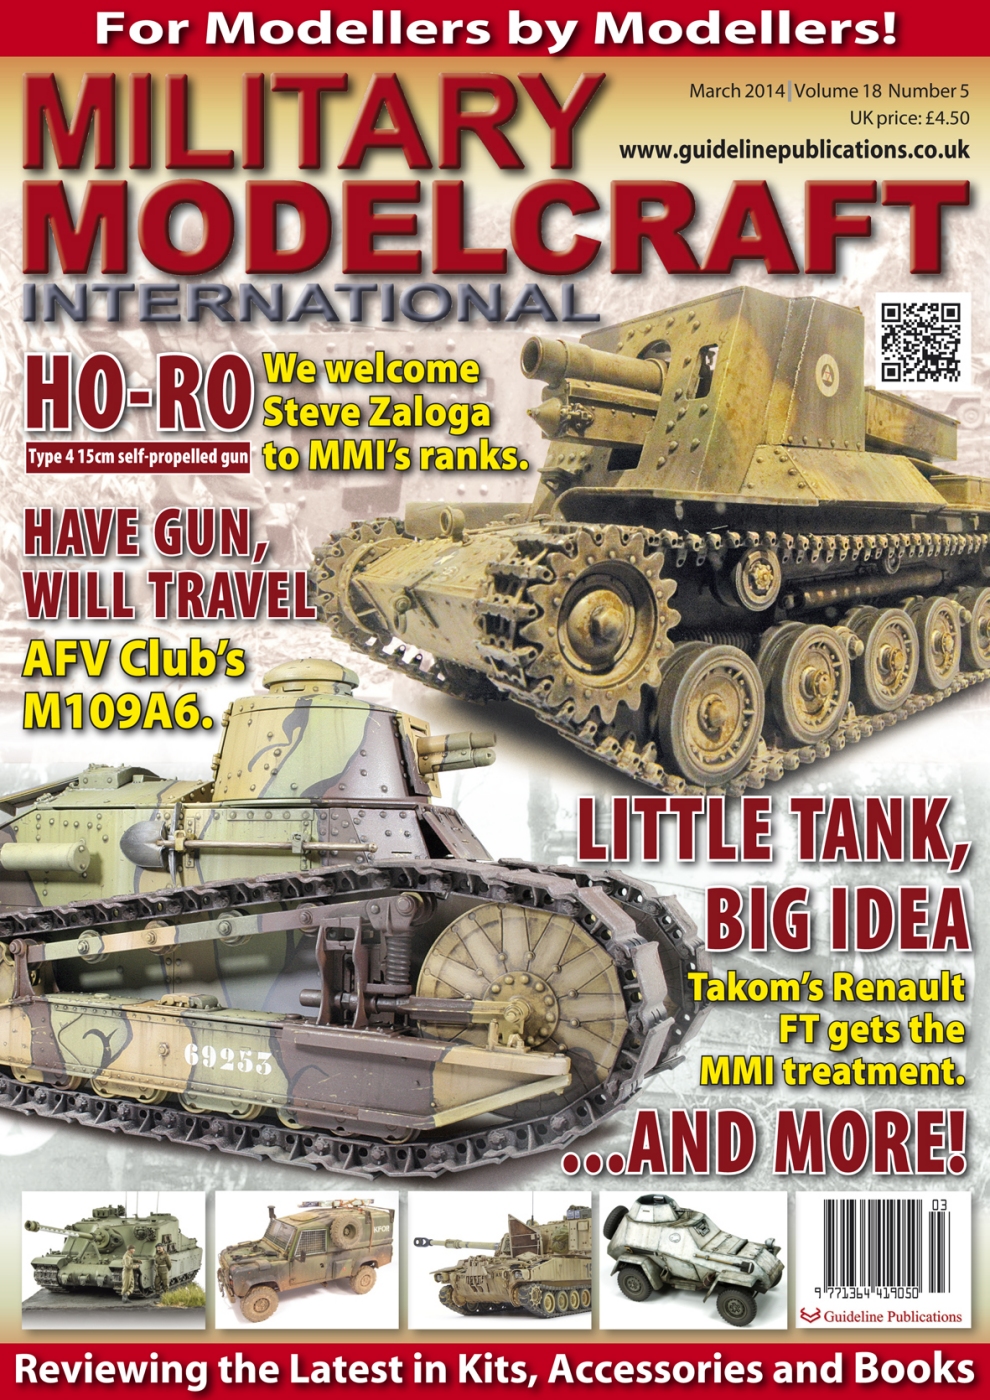 Guideline Publications Ltd Military Modelcraft March 2014 vol 18 - 05 